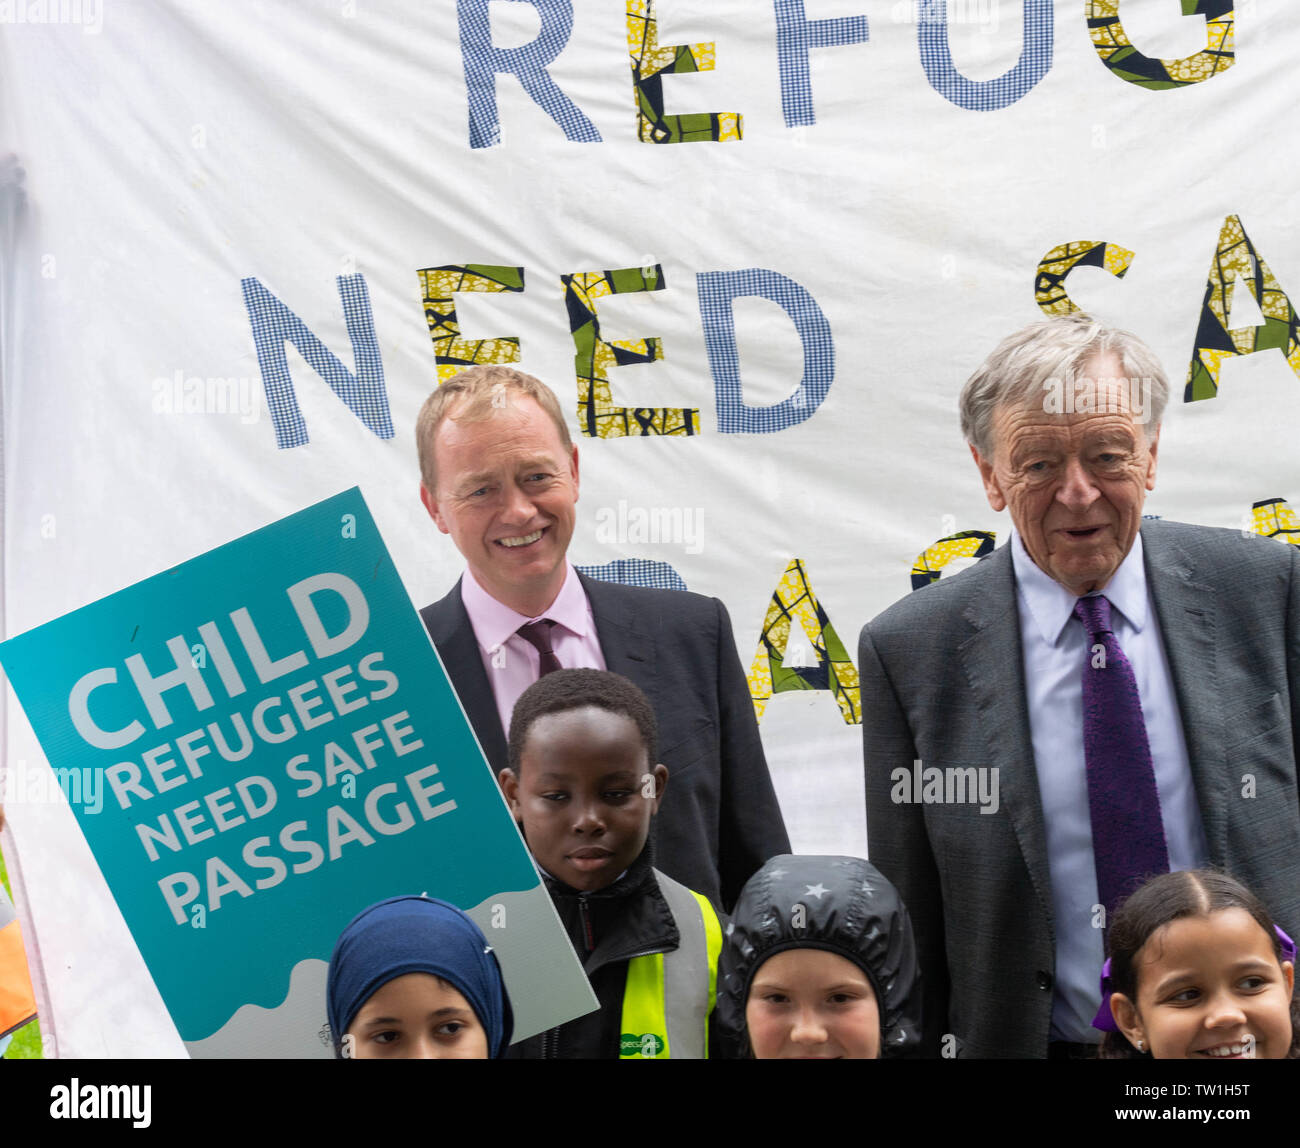 London 18th June 2019 Safe passage campaign; a campaign seeking to guarantee safe passage for unaccompaned refugee children  Pictured Tim Faron MP (ldft) Lord Dubs (right) Credit Ian Davidson/Alamy Live News Stock Photo